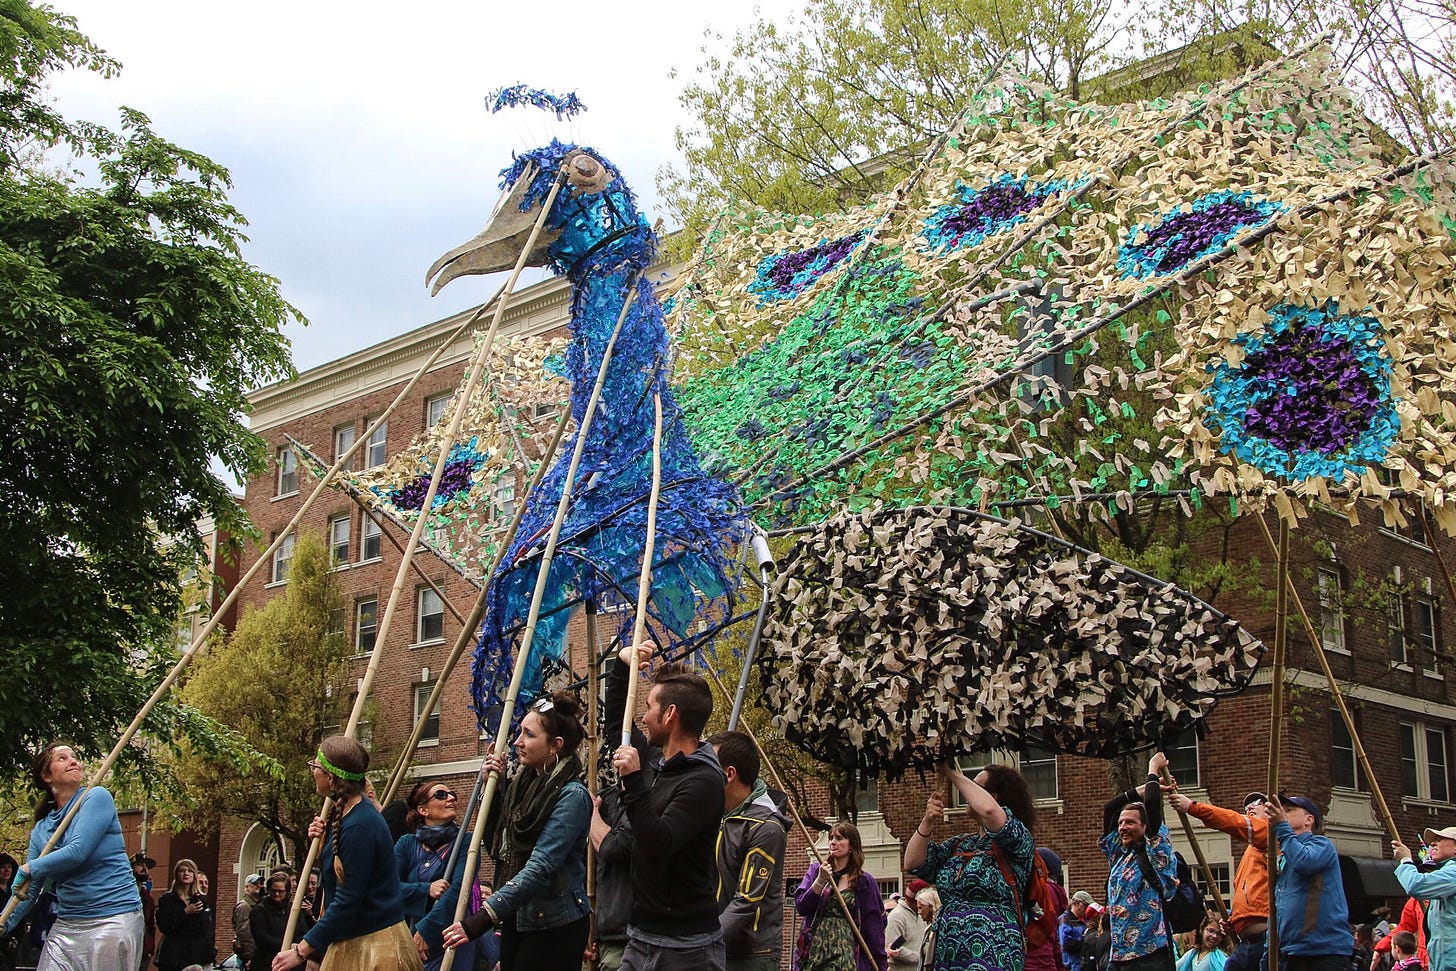 Photo of the Procession of the Species parade featuring several people holding up a large paper peacock as they march down the road.